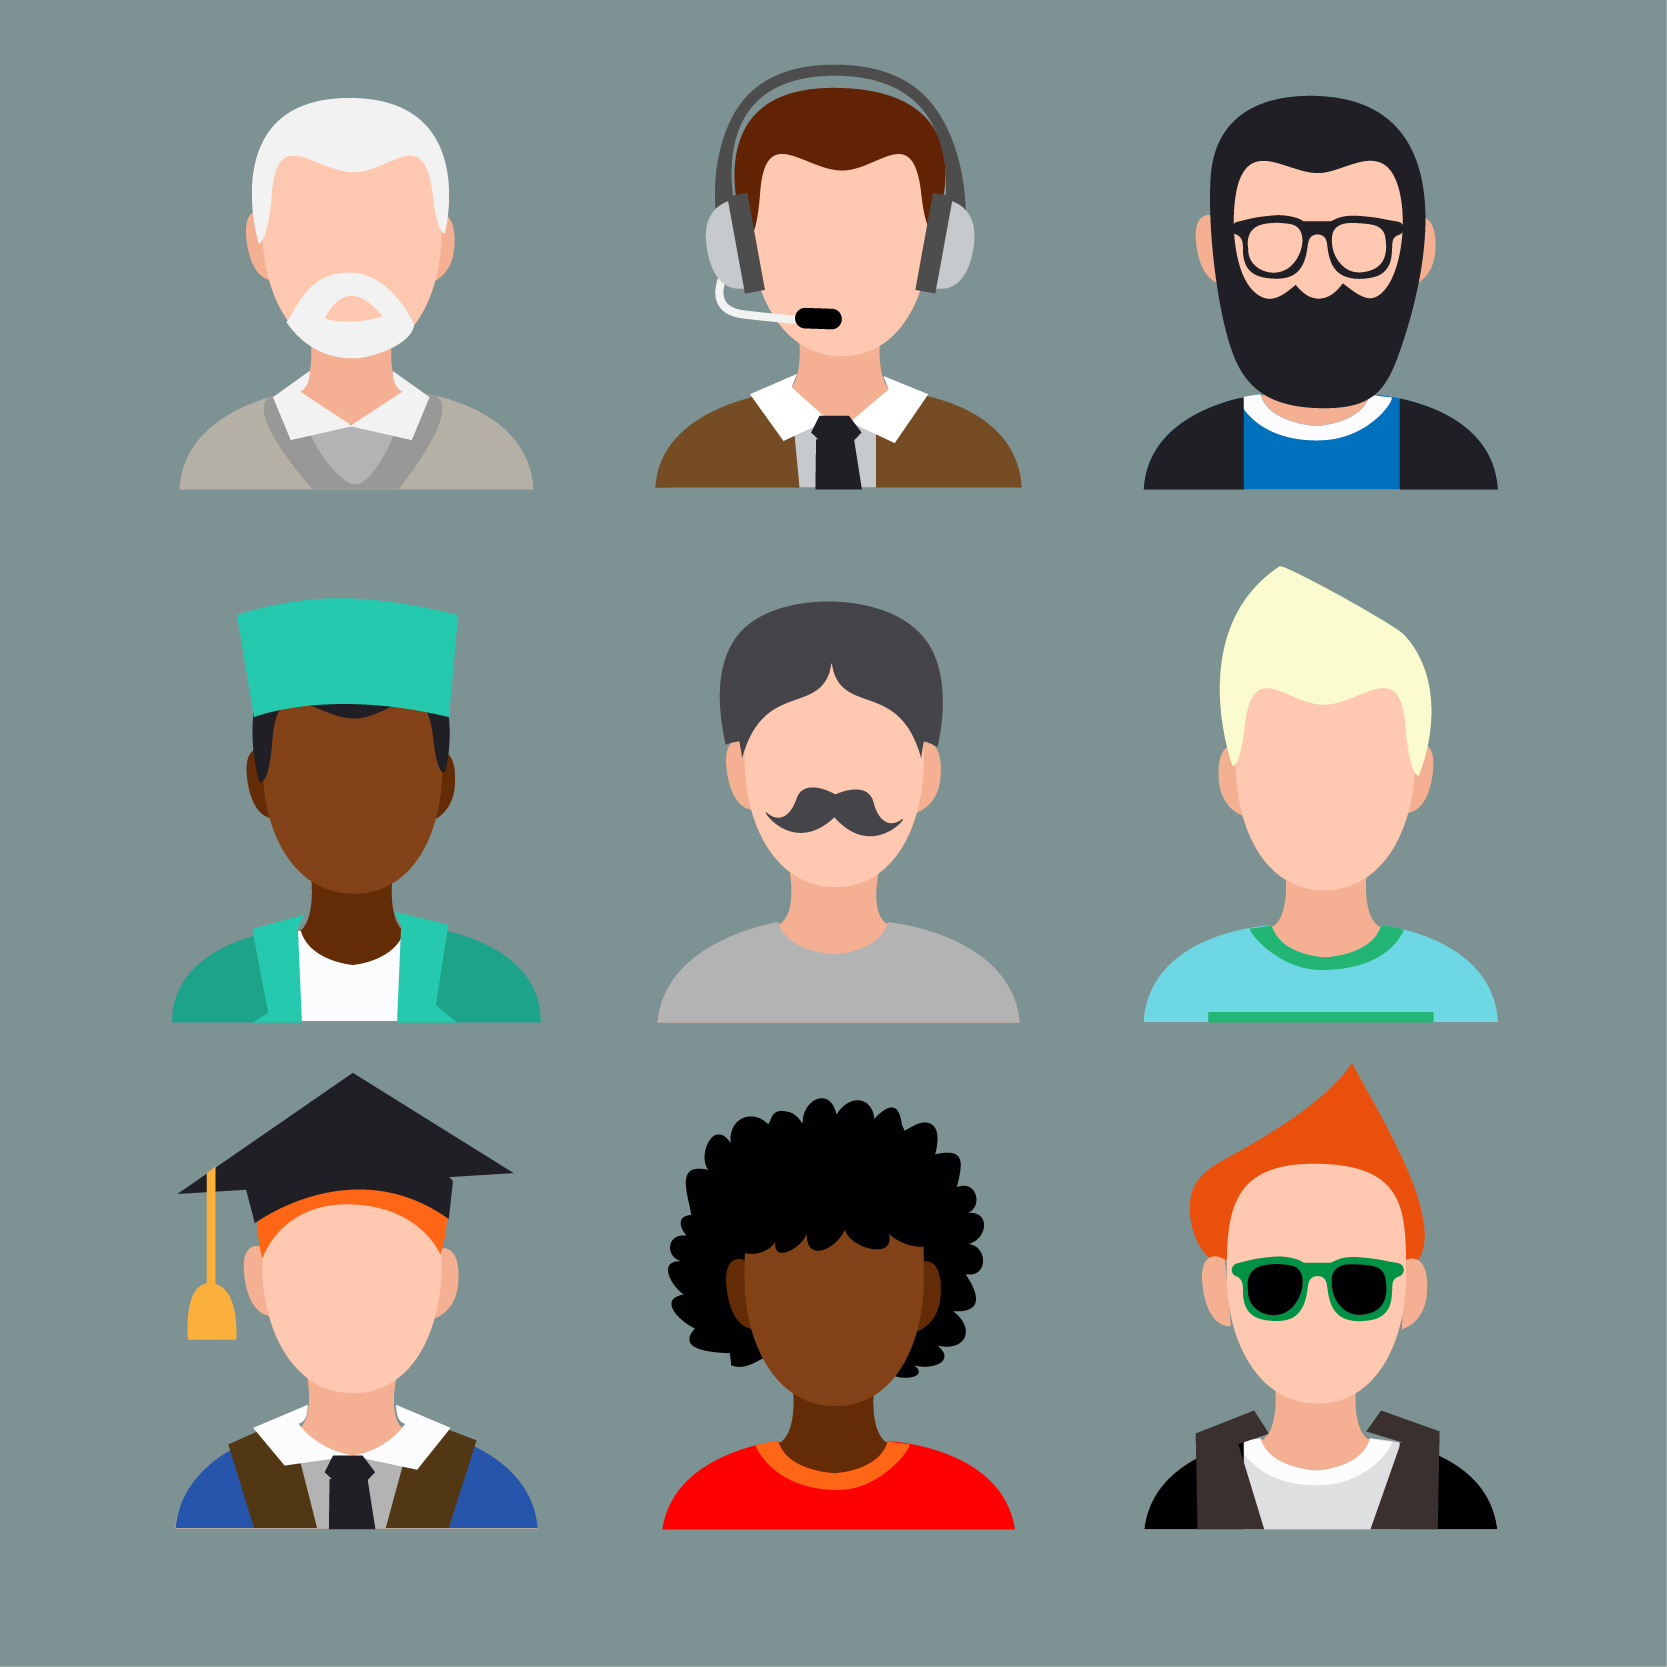 FREE 30+ Vector People Avatars Set in PSD